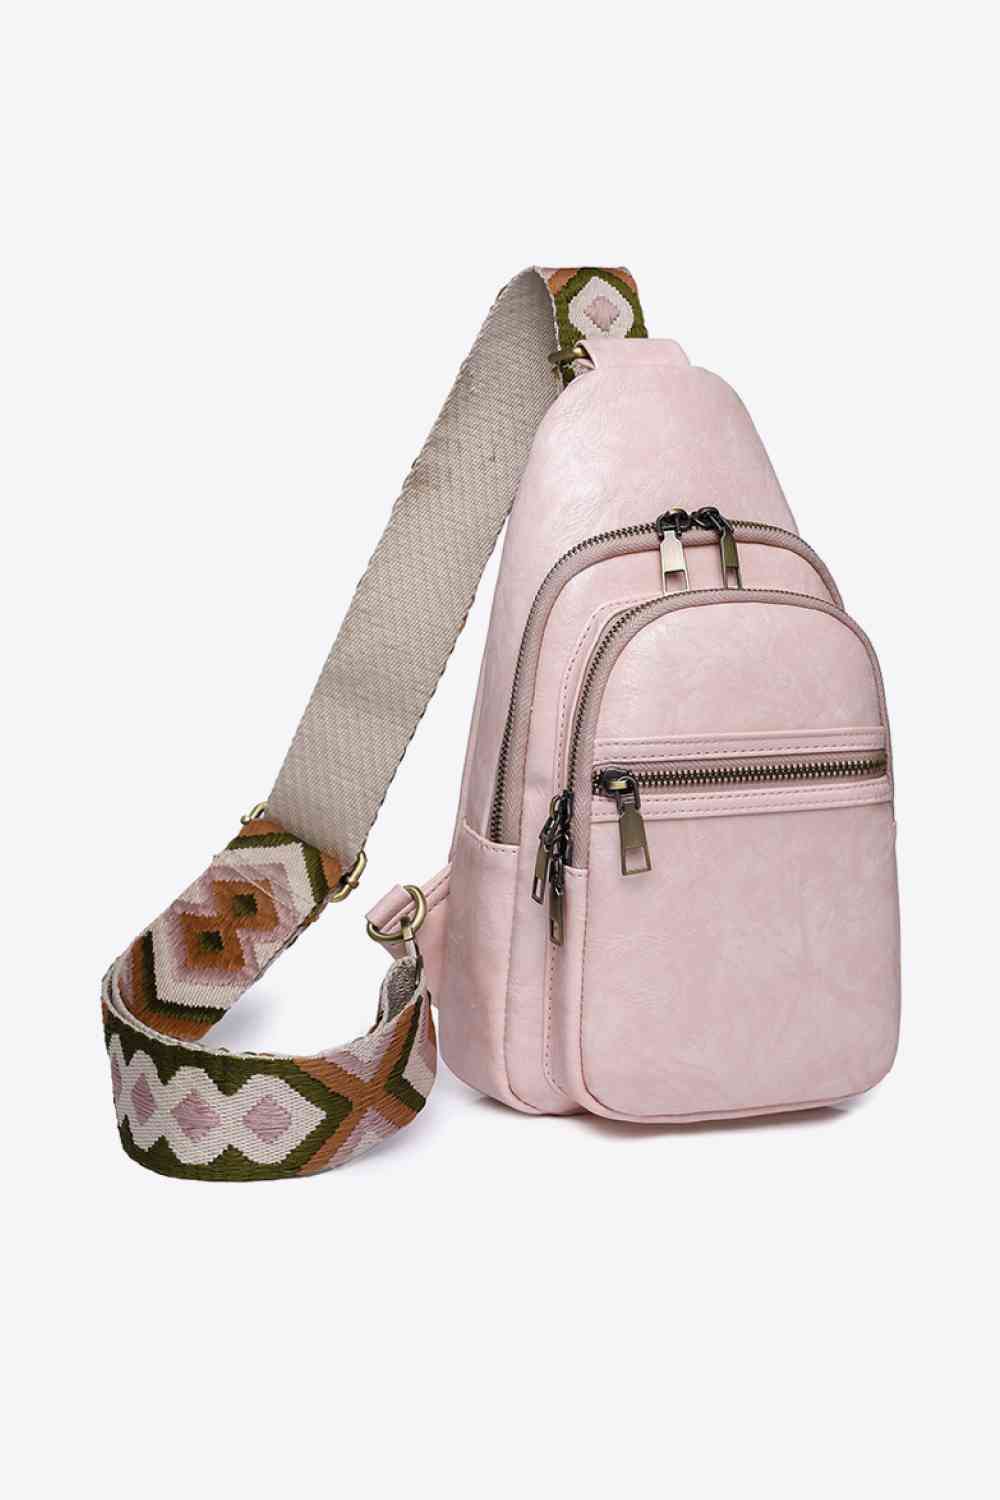 Adored It's Your Time PU Leather Sling Bag Blush Pink One Size